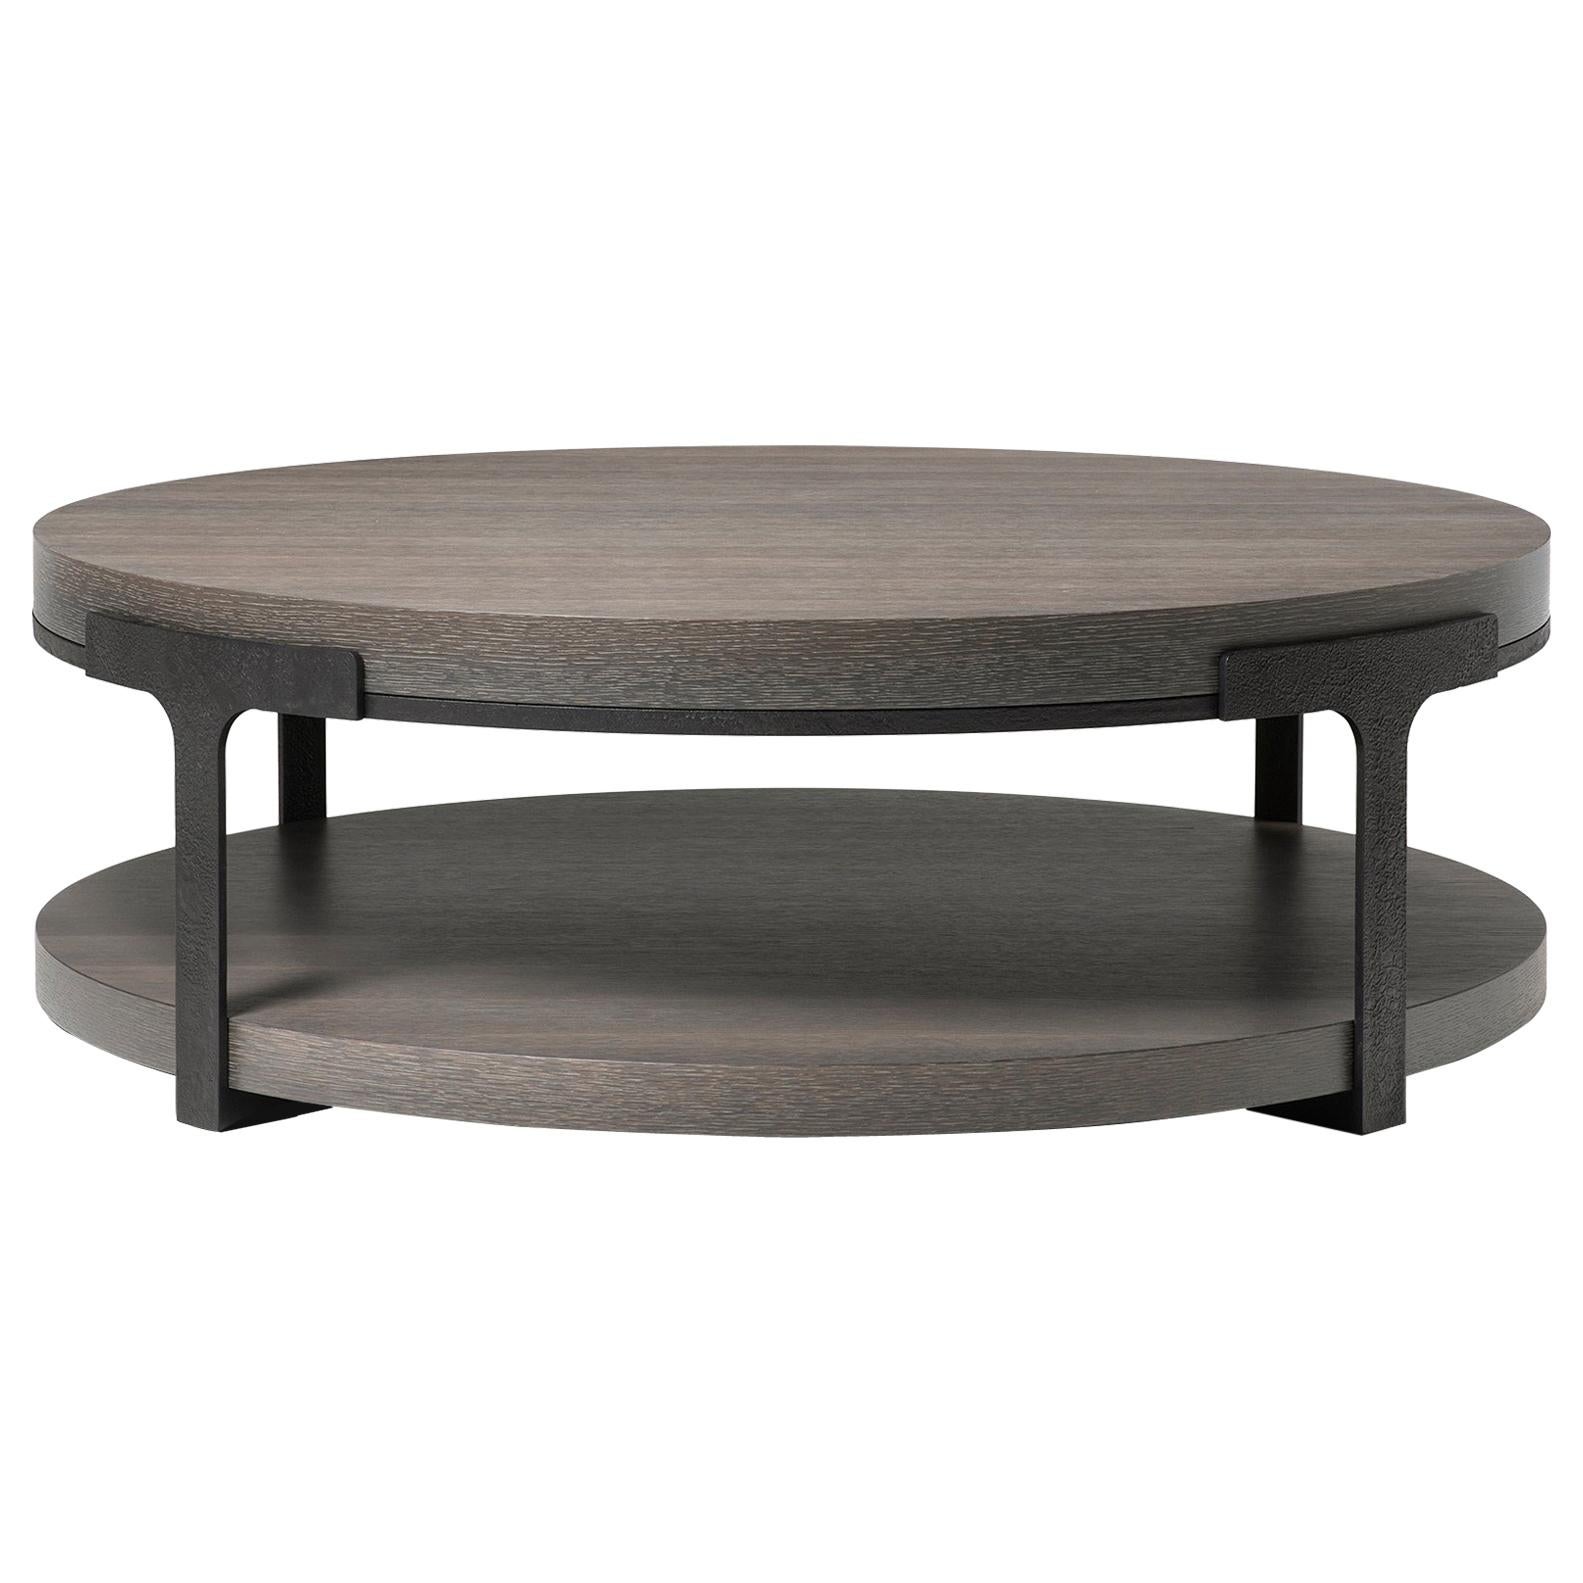 HOLLY HUNT Tudor Round Cocktail Table with Oak Top and Metal Base